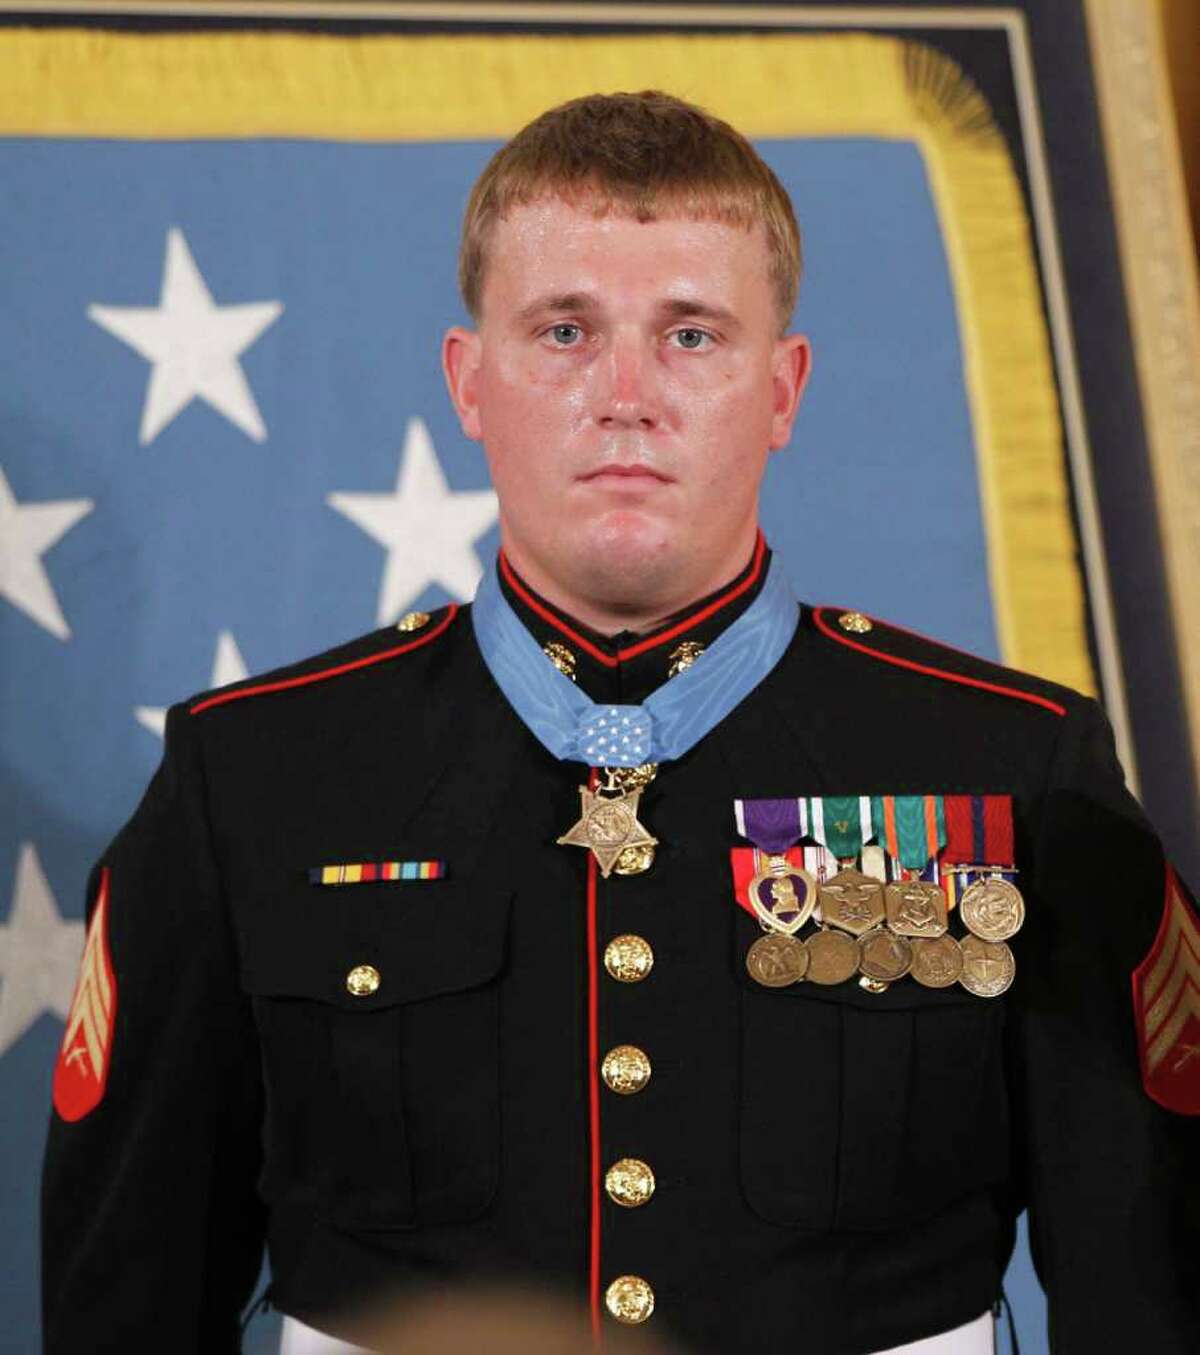 FILE- In this Sept. 15, 2010 file photo, Medal of Honor recipient, former U.S. Marine Sgt. Dakota Meyer, wears his medal after it was awarded to him by President Barack Obama, during a ceremony in the East Room of the White House in Washington. Meyer is suing a defense contractor that he says cost him a job by characterizing him as mentally unstable and having alcohol problems to a prospective employer.